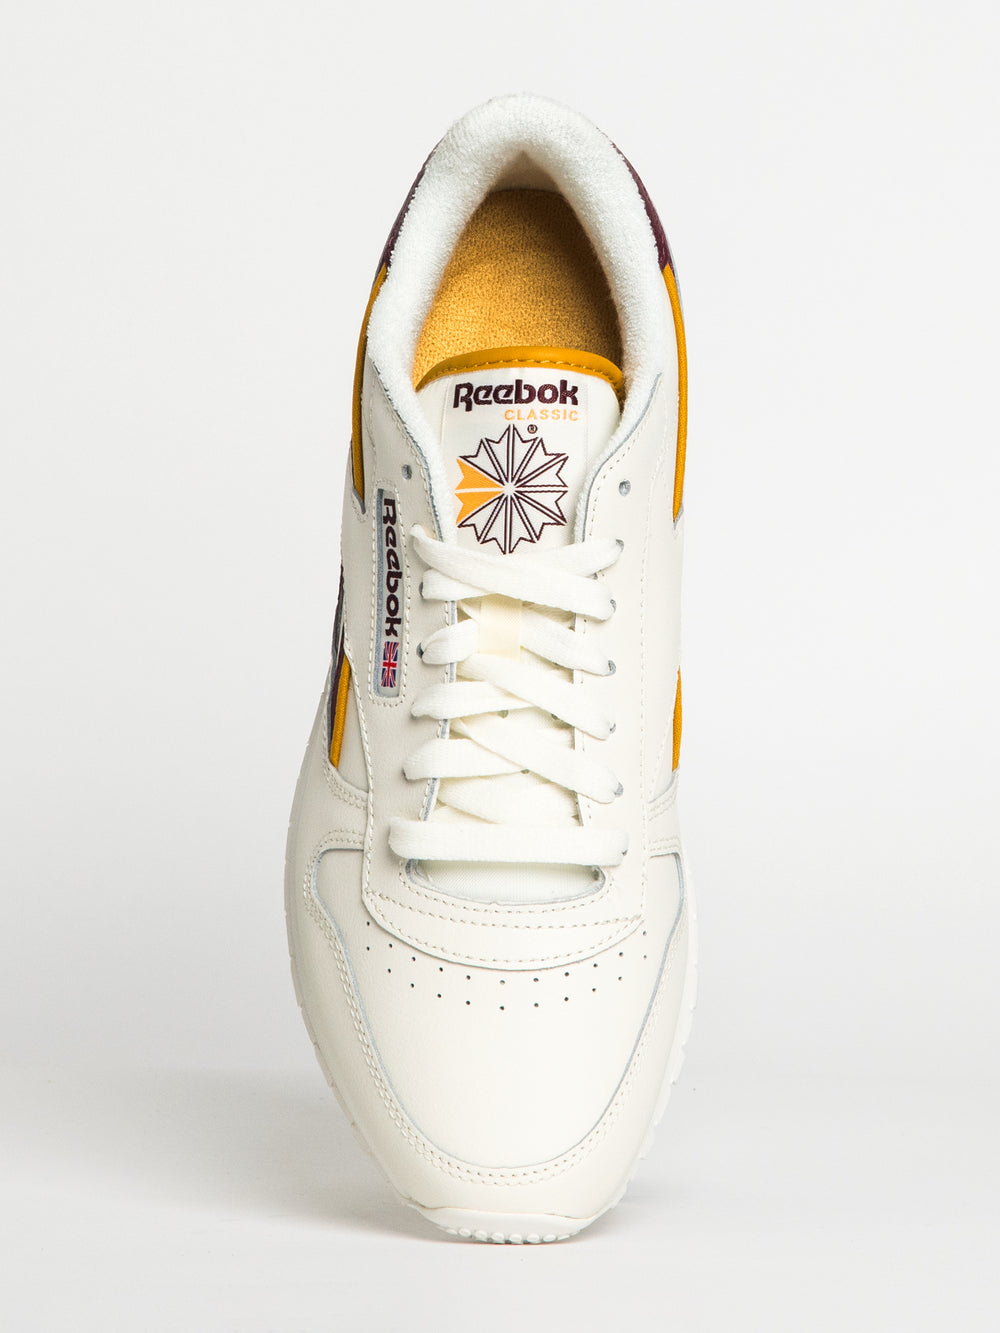 MENS REEBOK CLASSIC LEATHER Collective | SNEAKER Boathouse Footwear